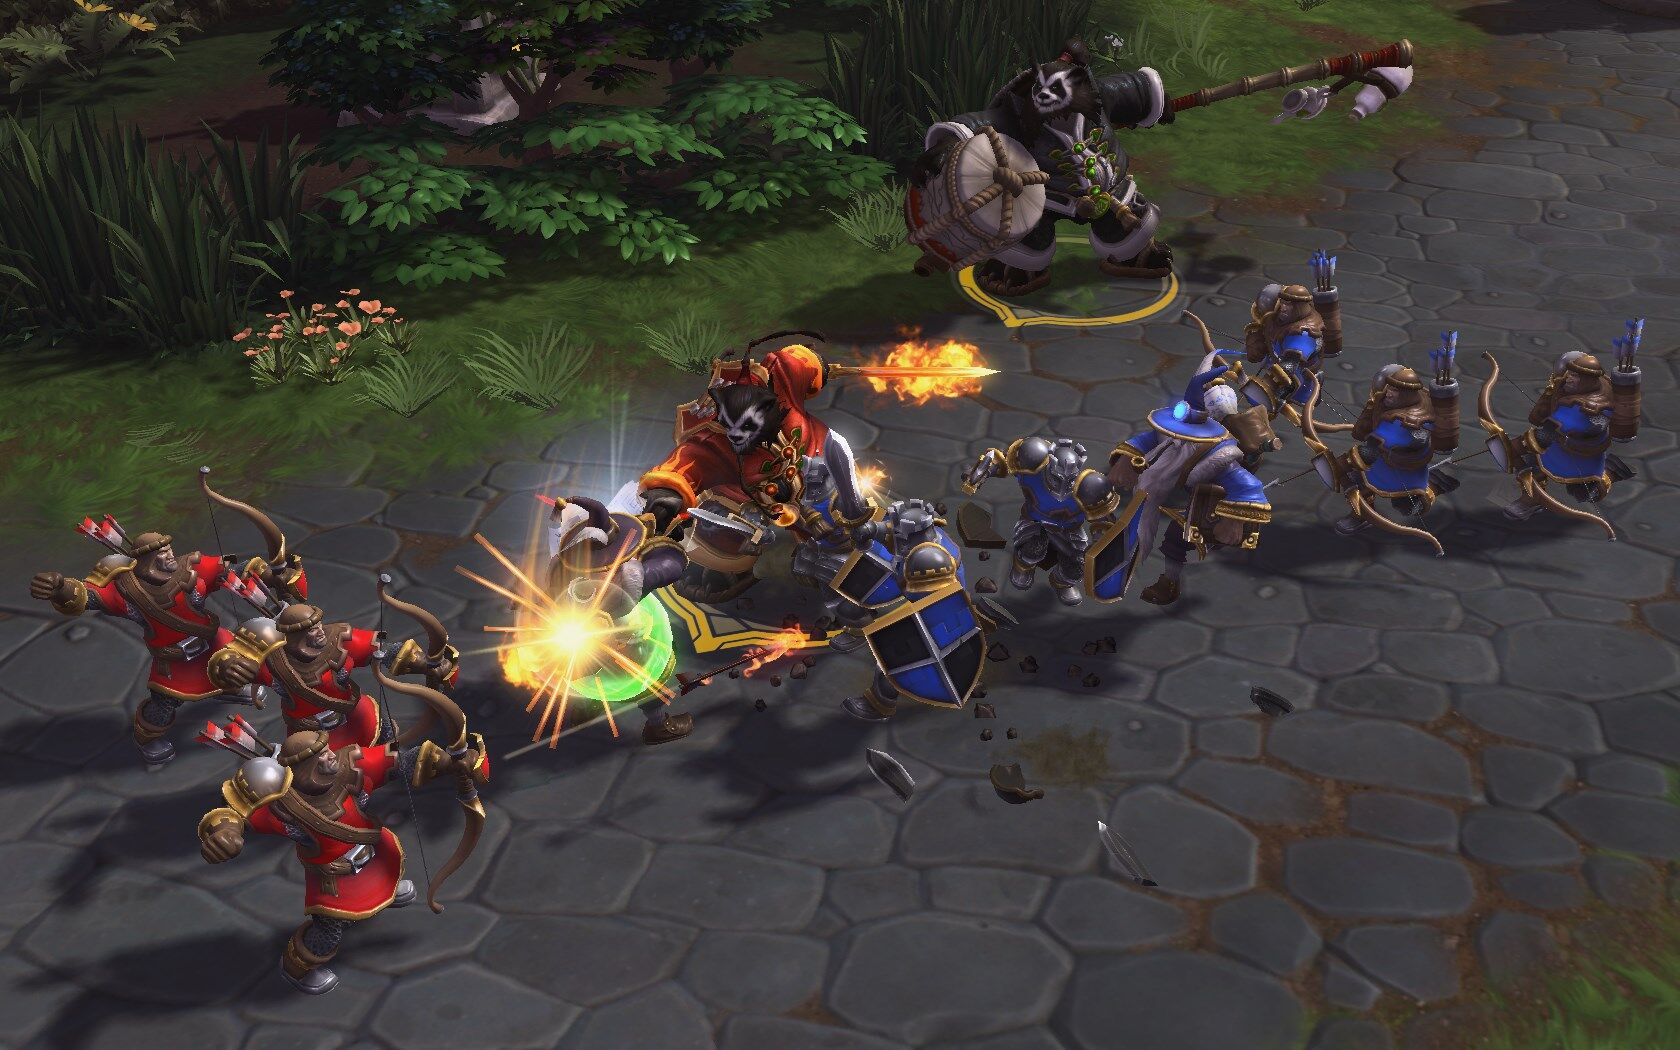 Heroes of the Storm's newest map and hero are among its simplest